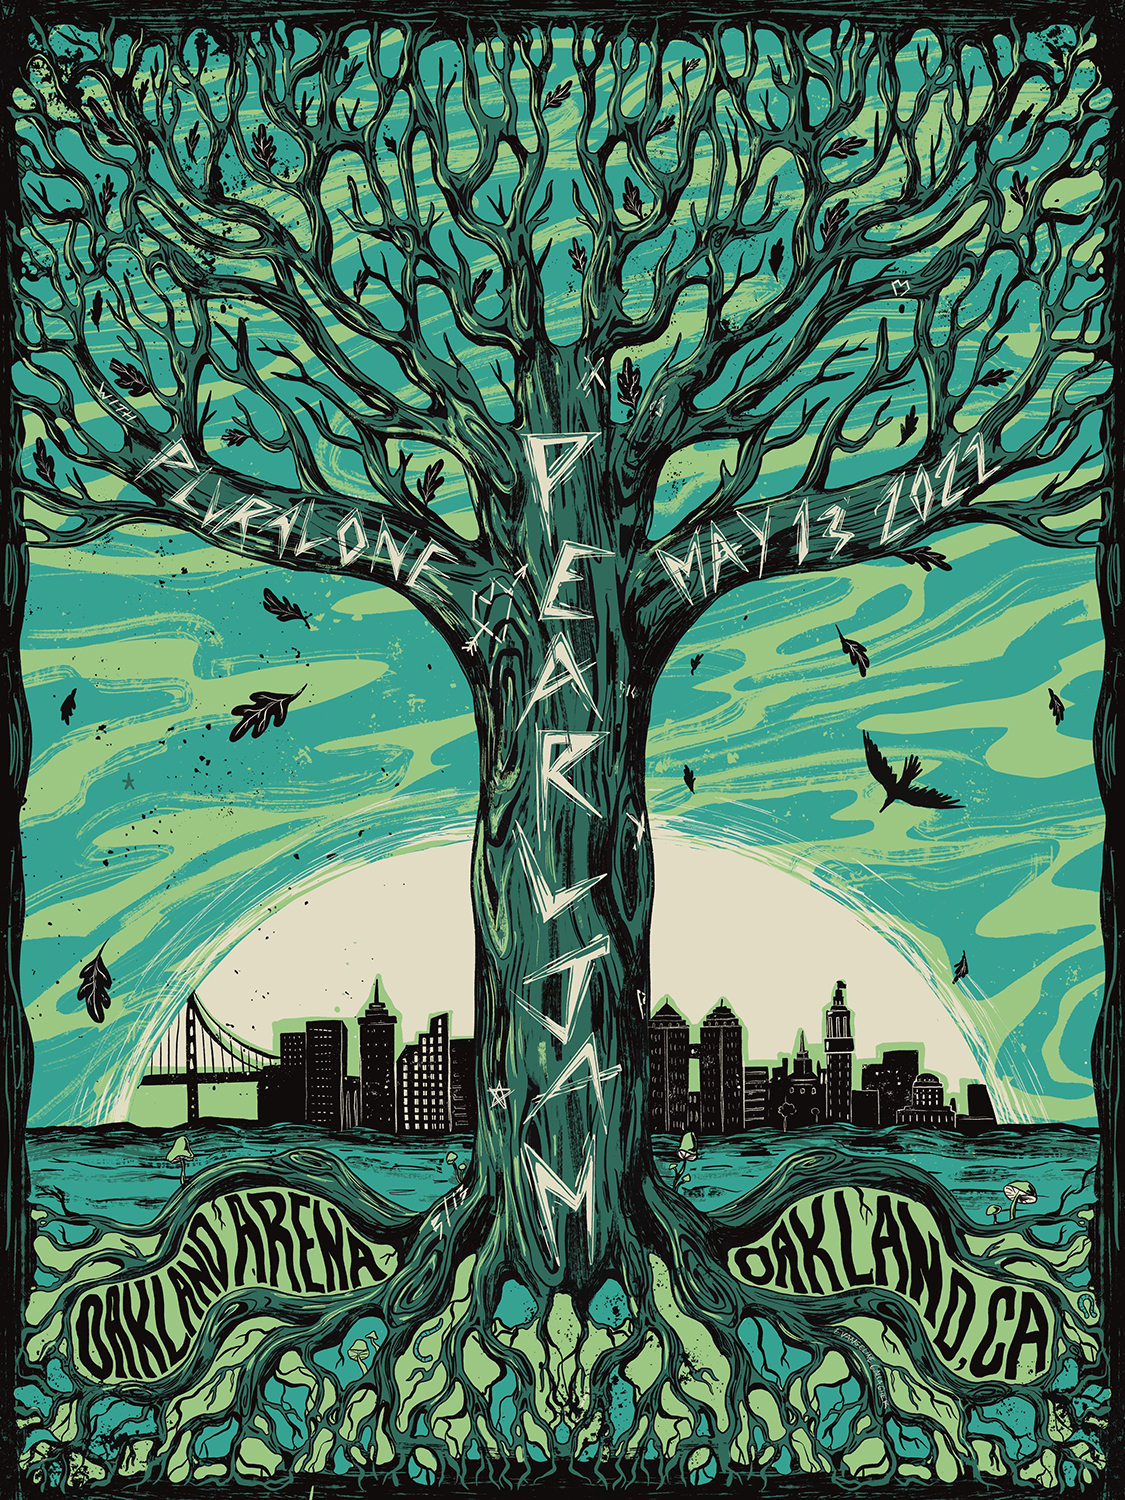 EVANGELINE GALLAGHER, PEARL JAM POSTER FOR TONIGHT'S SHOW IN OAKLAND, Levy Creative Management